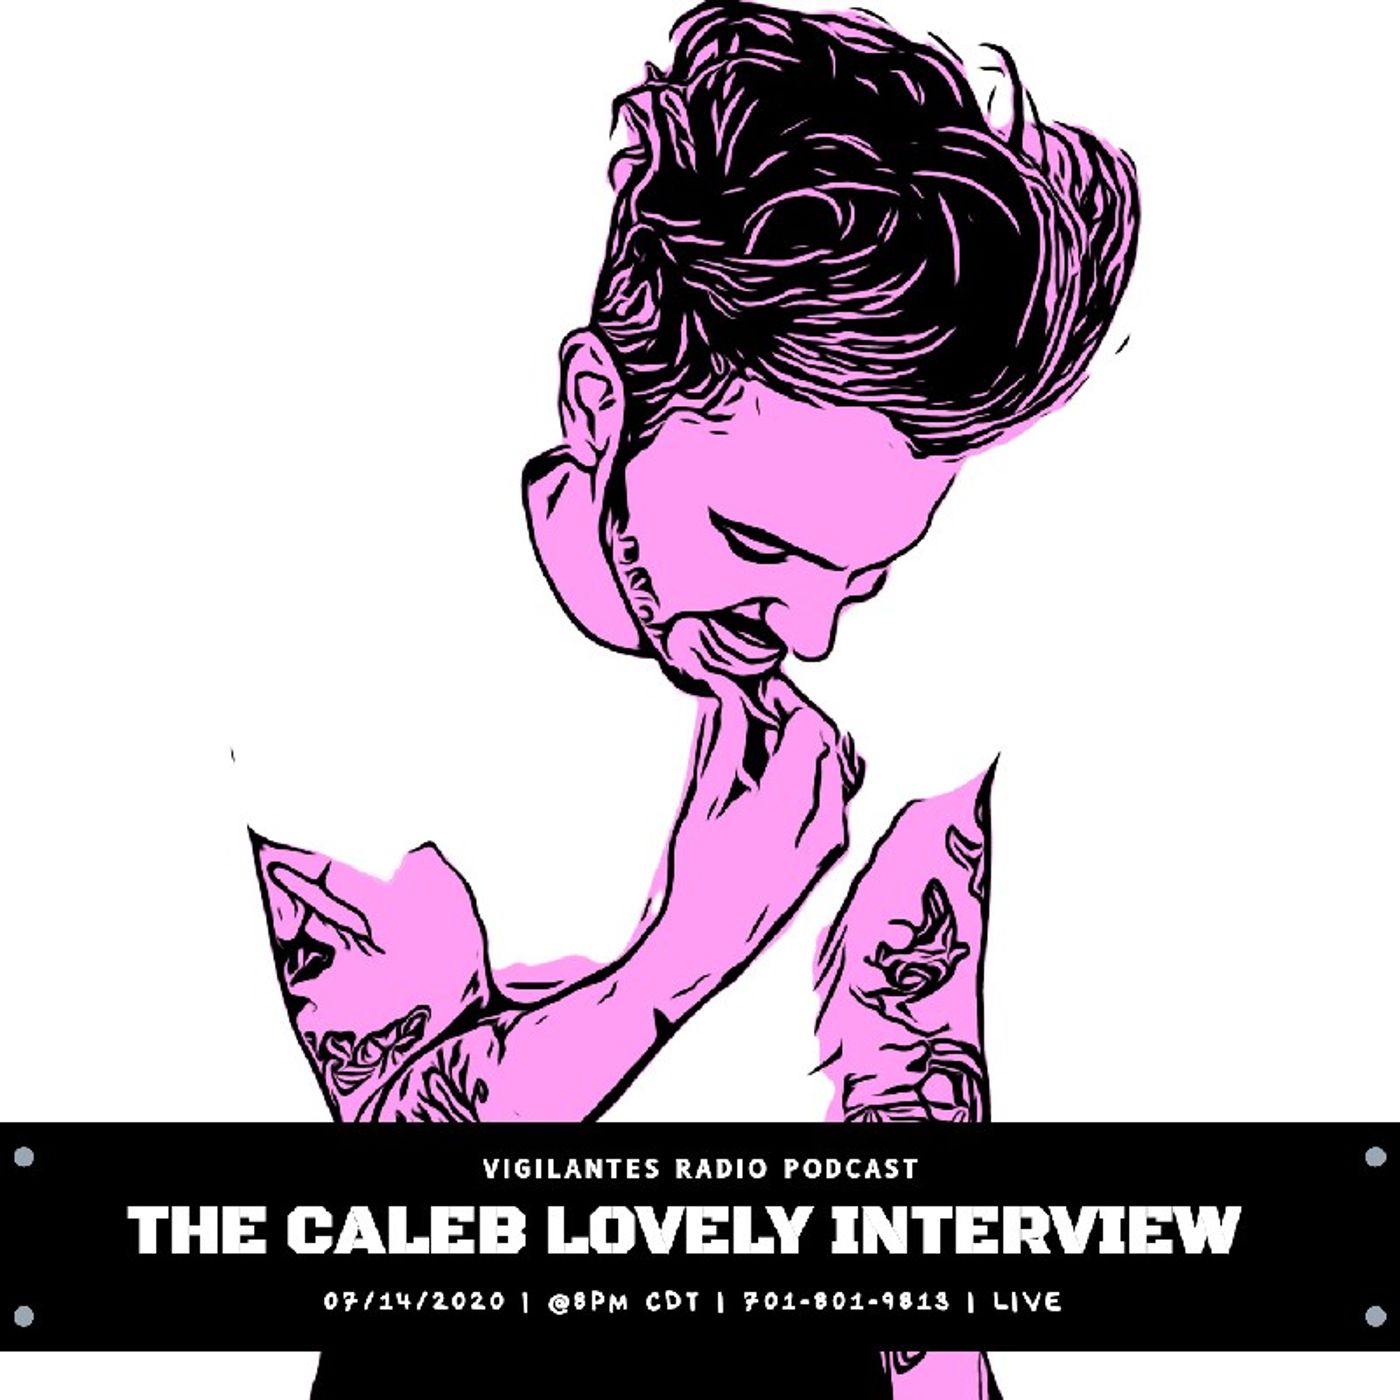 The Caleb Lovely Interview. Image